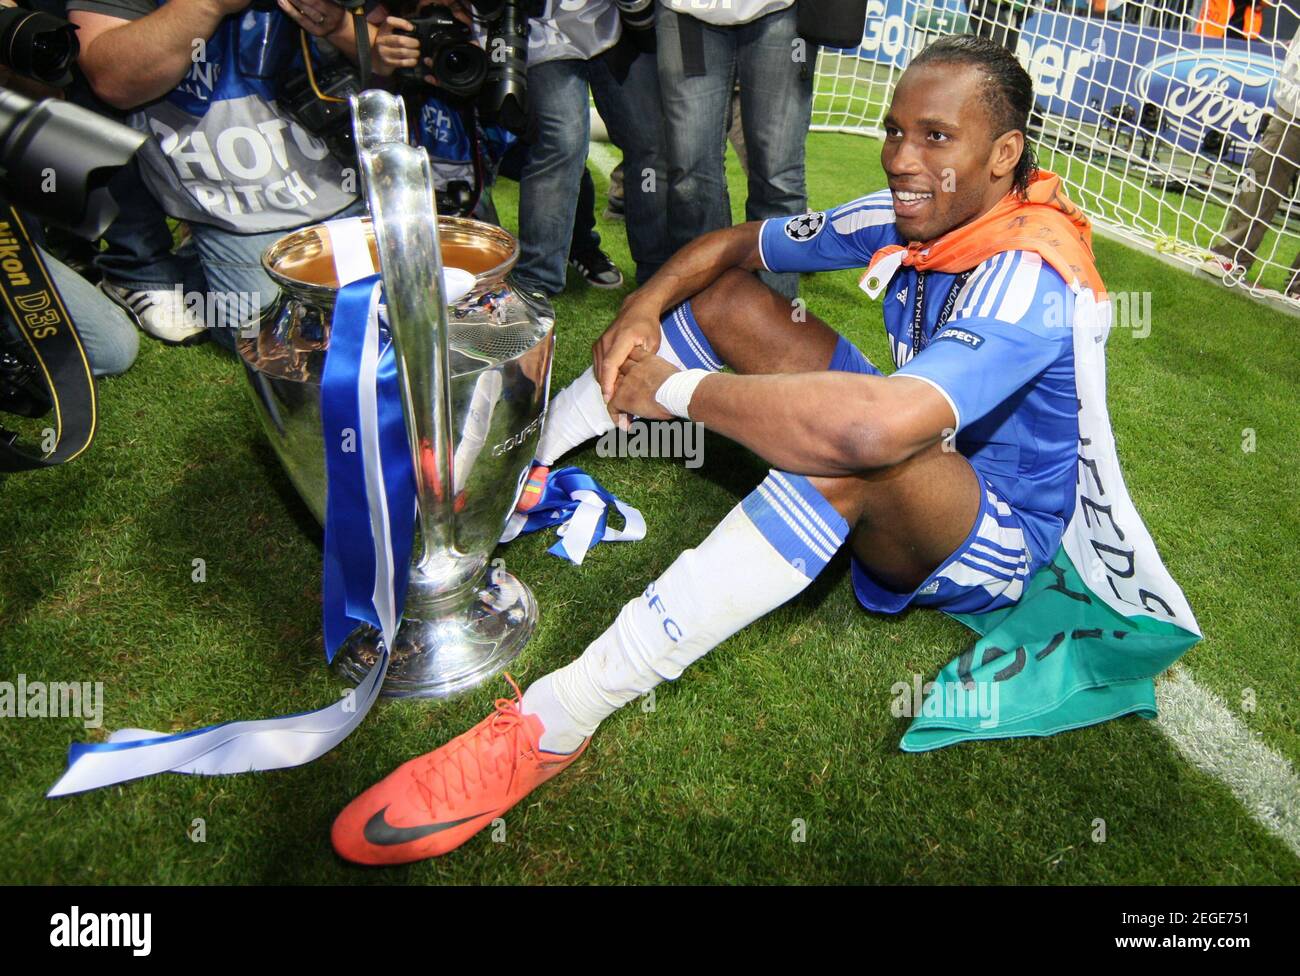 Football - Bayern Munich v Chelsea 2012 UEFA Champions League Final -  Allianz Arena, Munich, Germany - 19/5/12 Chelsea's Didier Drogba celebrates  with the trophy after winning the 2012 UEFA Champions League